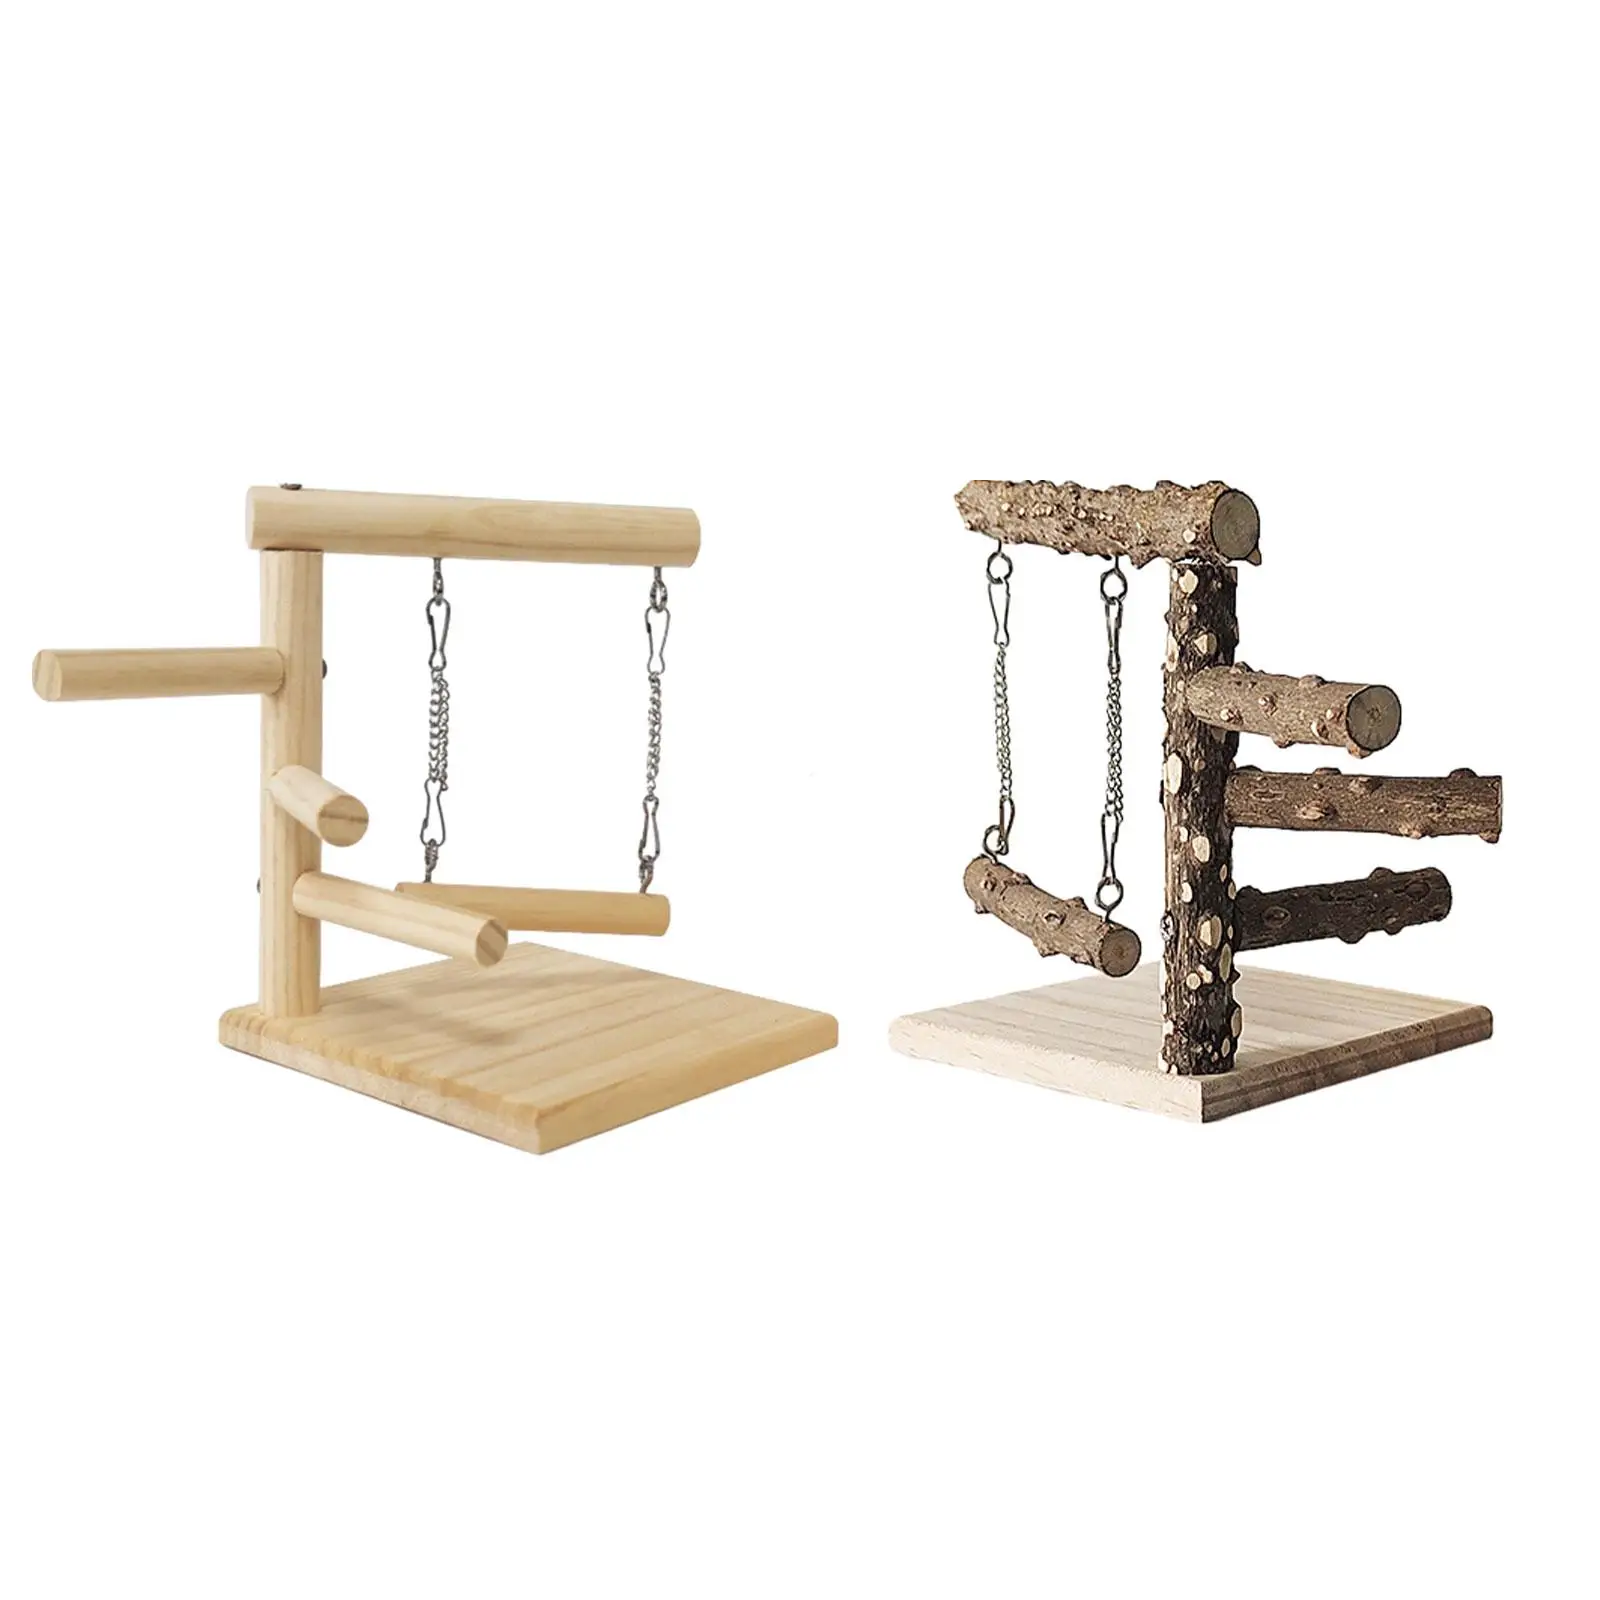 Parrot Playground Bird Gym Exercise Gym Playground Bird Tabletop Training Perch Play Stand for Canaries Cockatiels